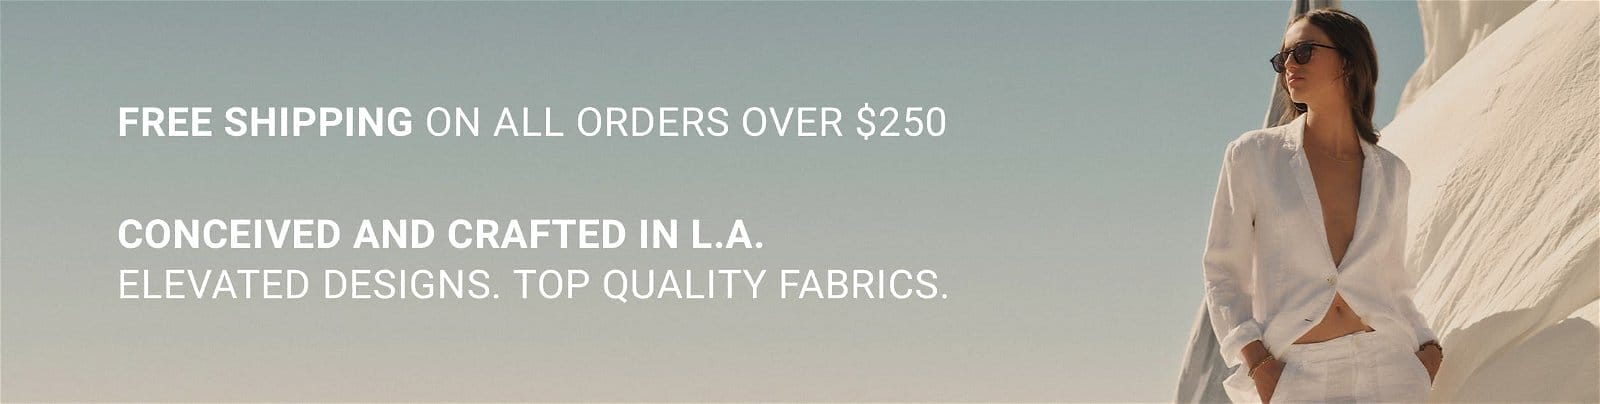 FREE SHIPPING ON ALL ORDERS OVER \\$250. CONCEIVED AND CRAFTED IN L.A. ELEVATED DESIGNS. TOP QUALITY FABRICS.